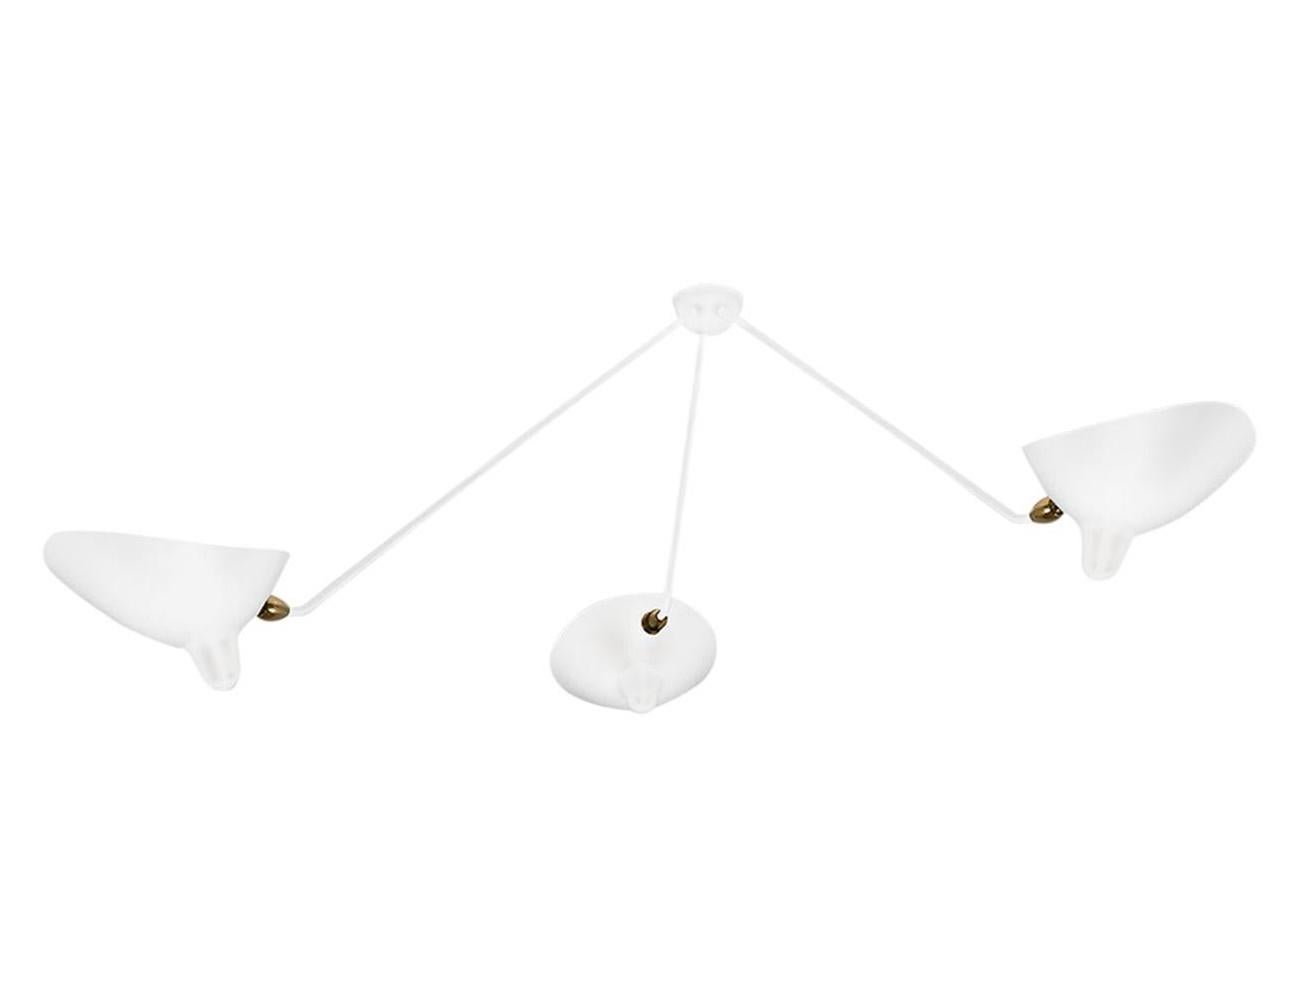 A slight angle at the end of each arm allows this classic design to be equally at home on the ceiling. With rotating heads on fixed arms, the versatility is only rivaled by its beauty.

Available in white or black. Brass swivels connect the